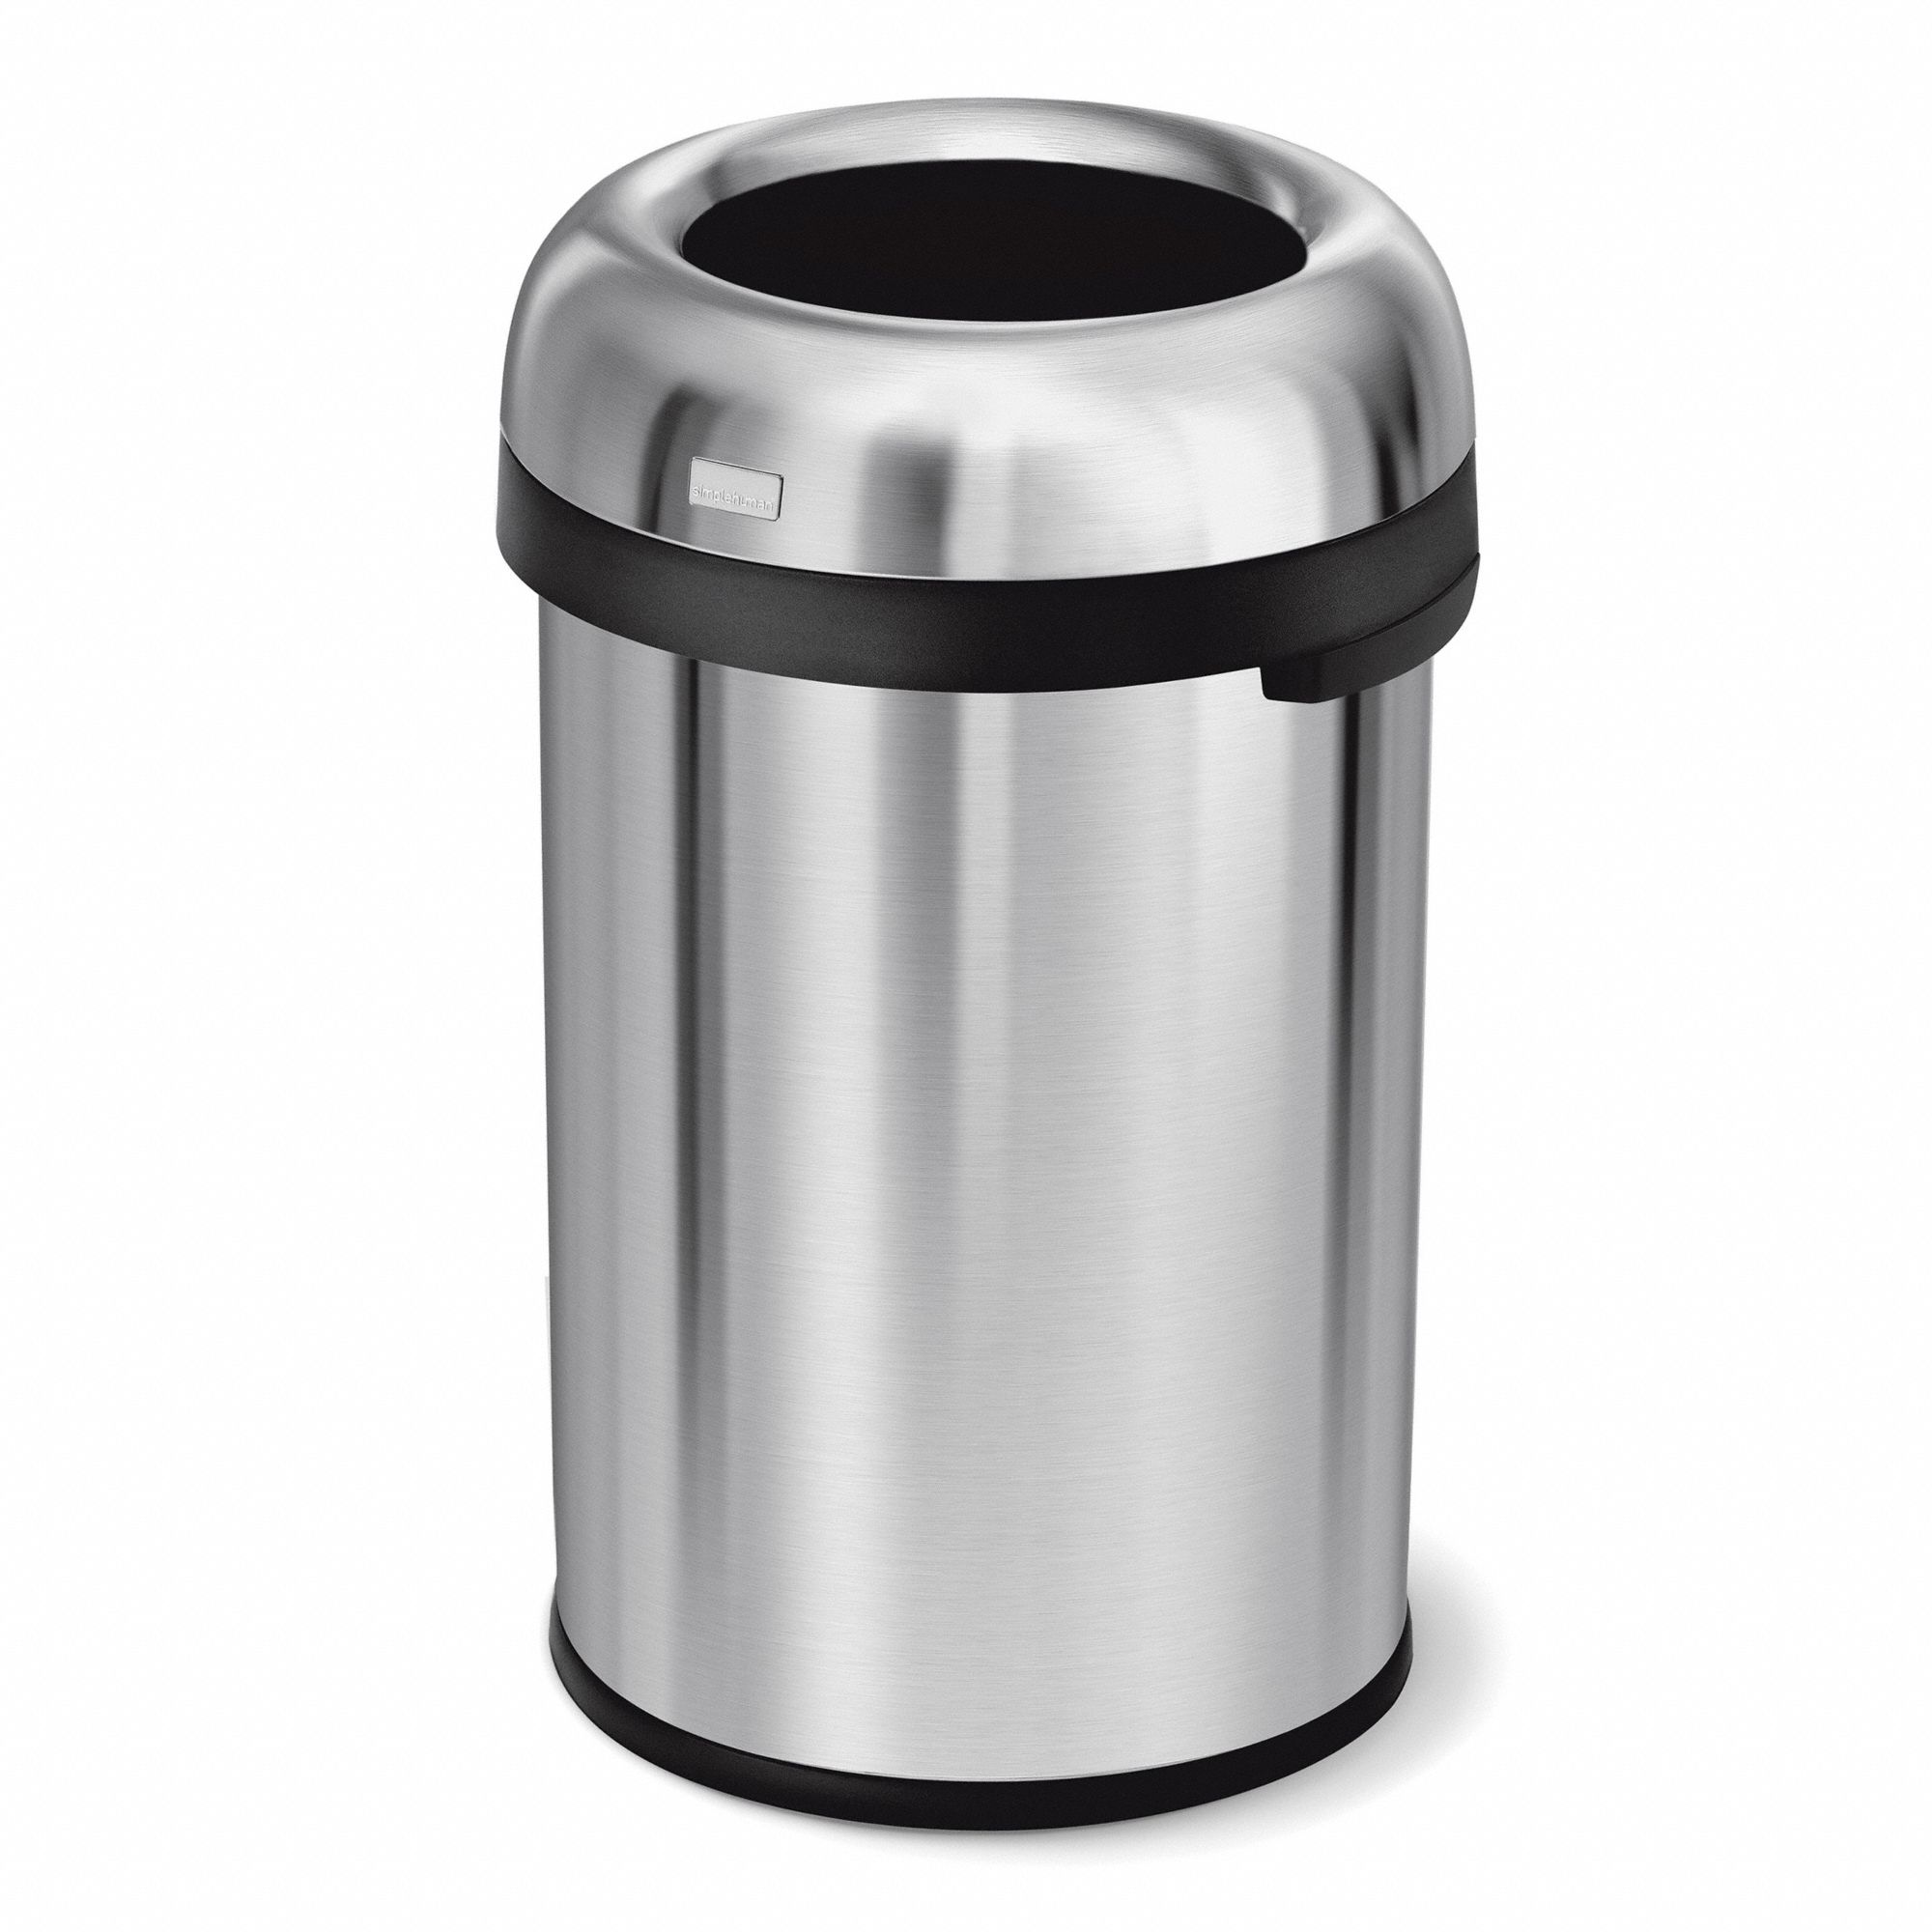 Trash Can: Stainless Steel, Dome Top, Silver, 30 gal Capacity, 18 9/10 in Wd/Dia